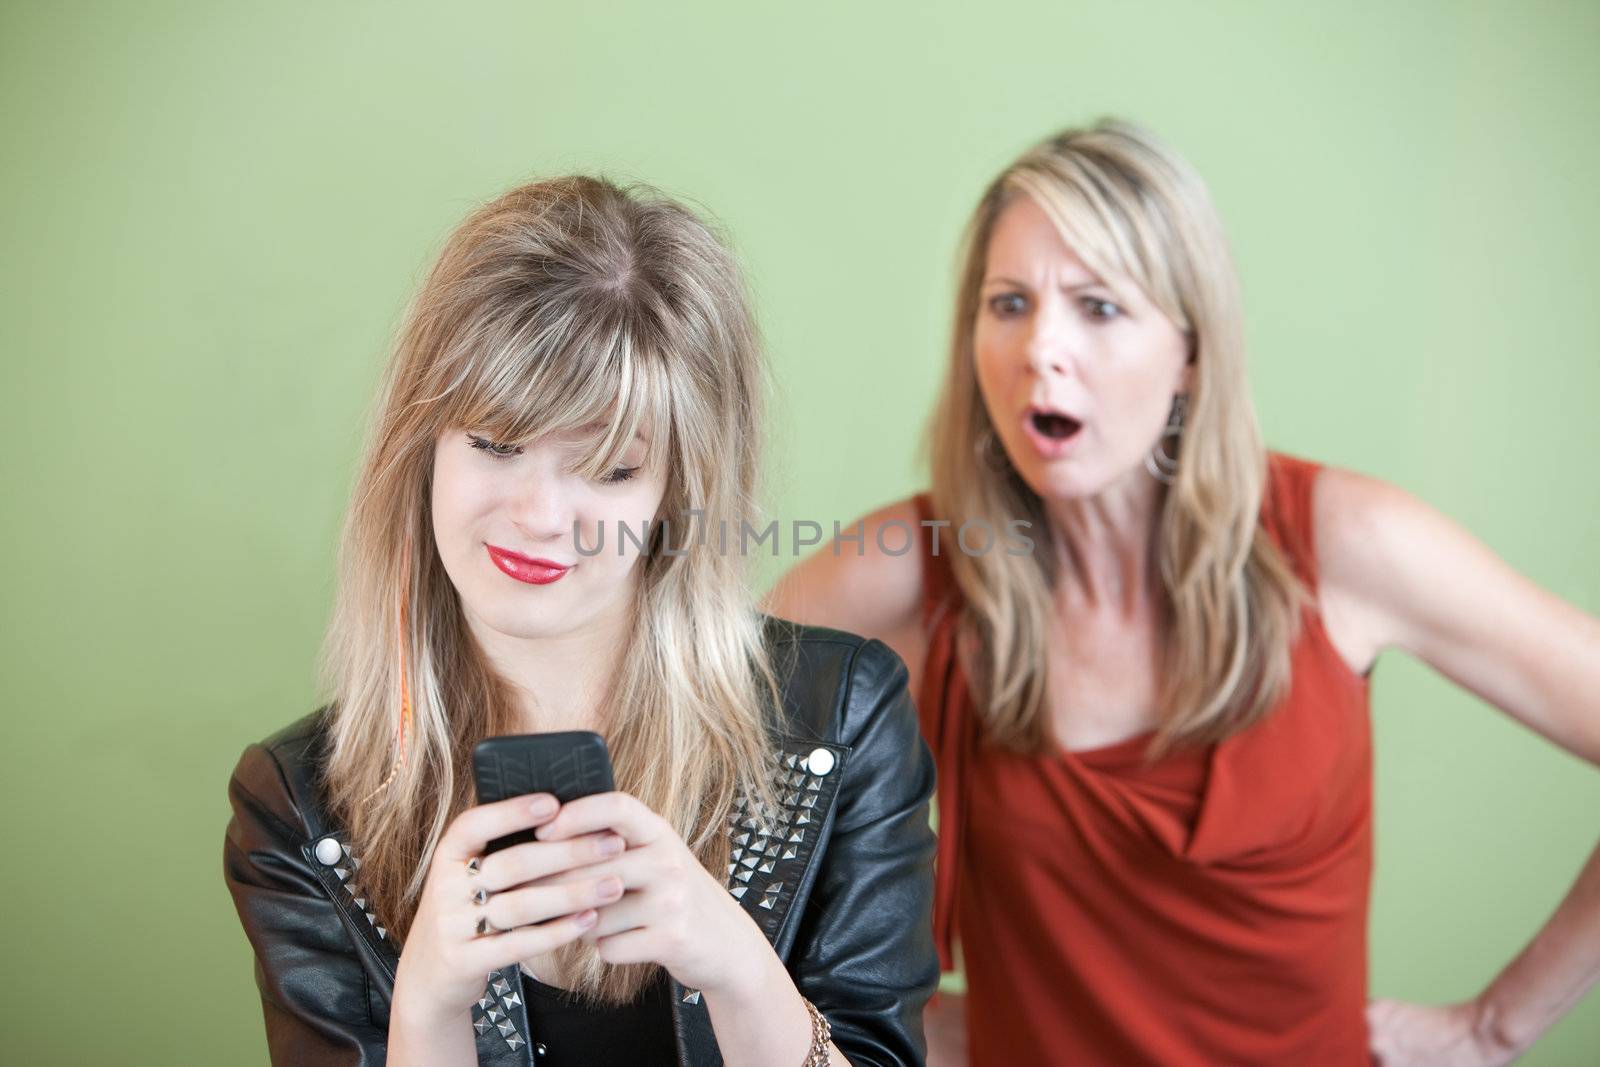 Shocked mom watches teen use phone over green background